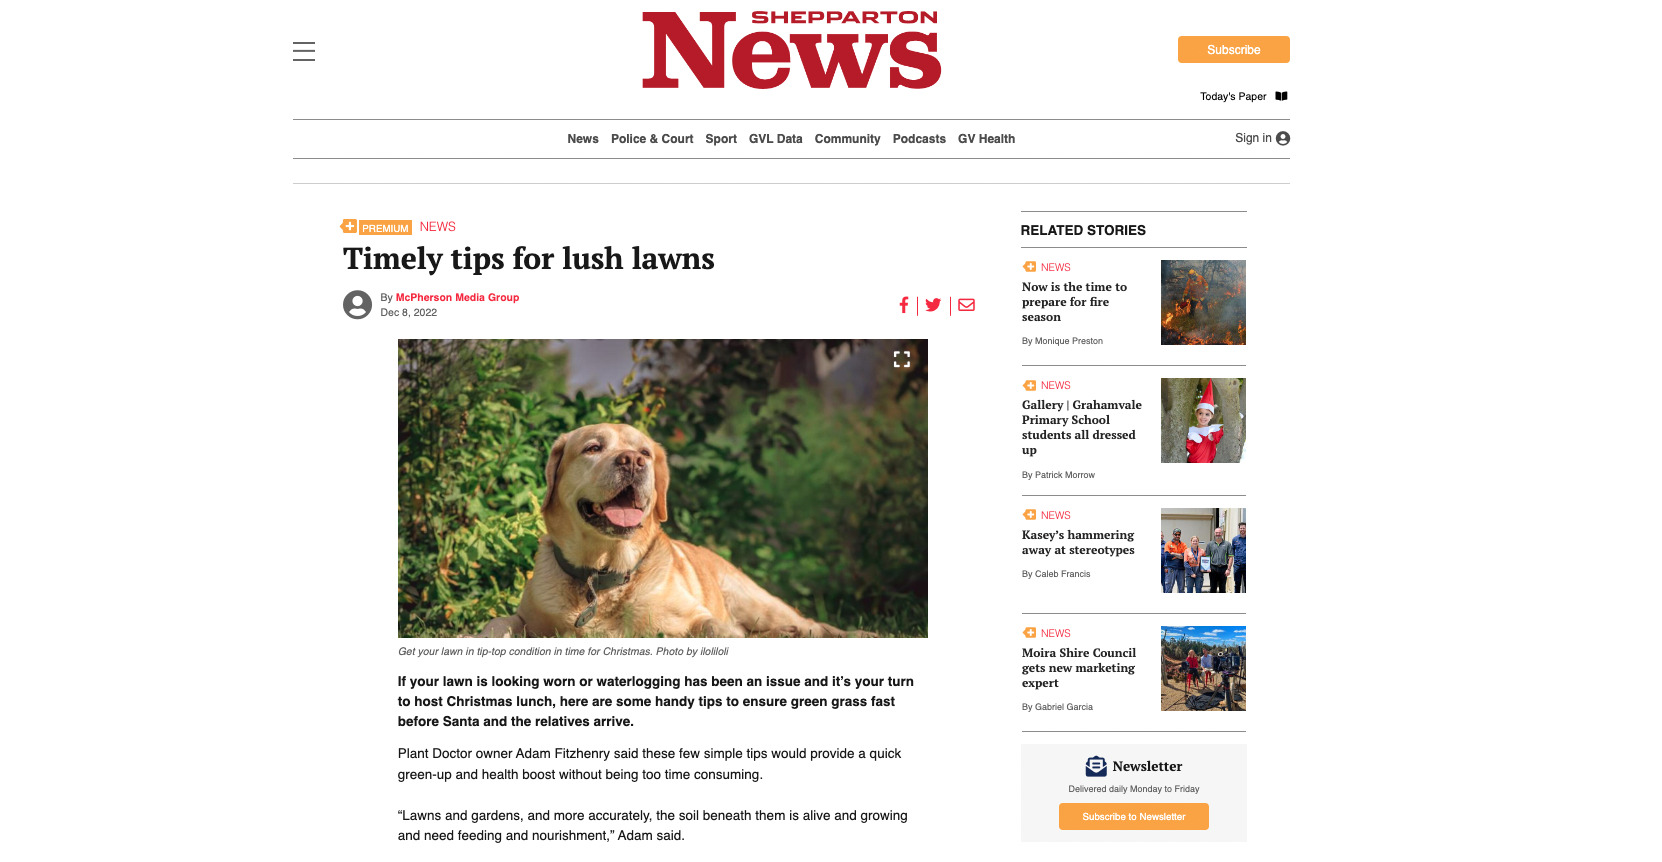 Timely tips for lush lawns with Shepparton News 